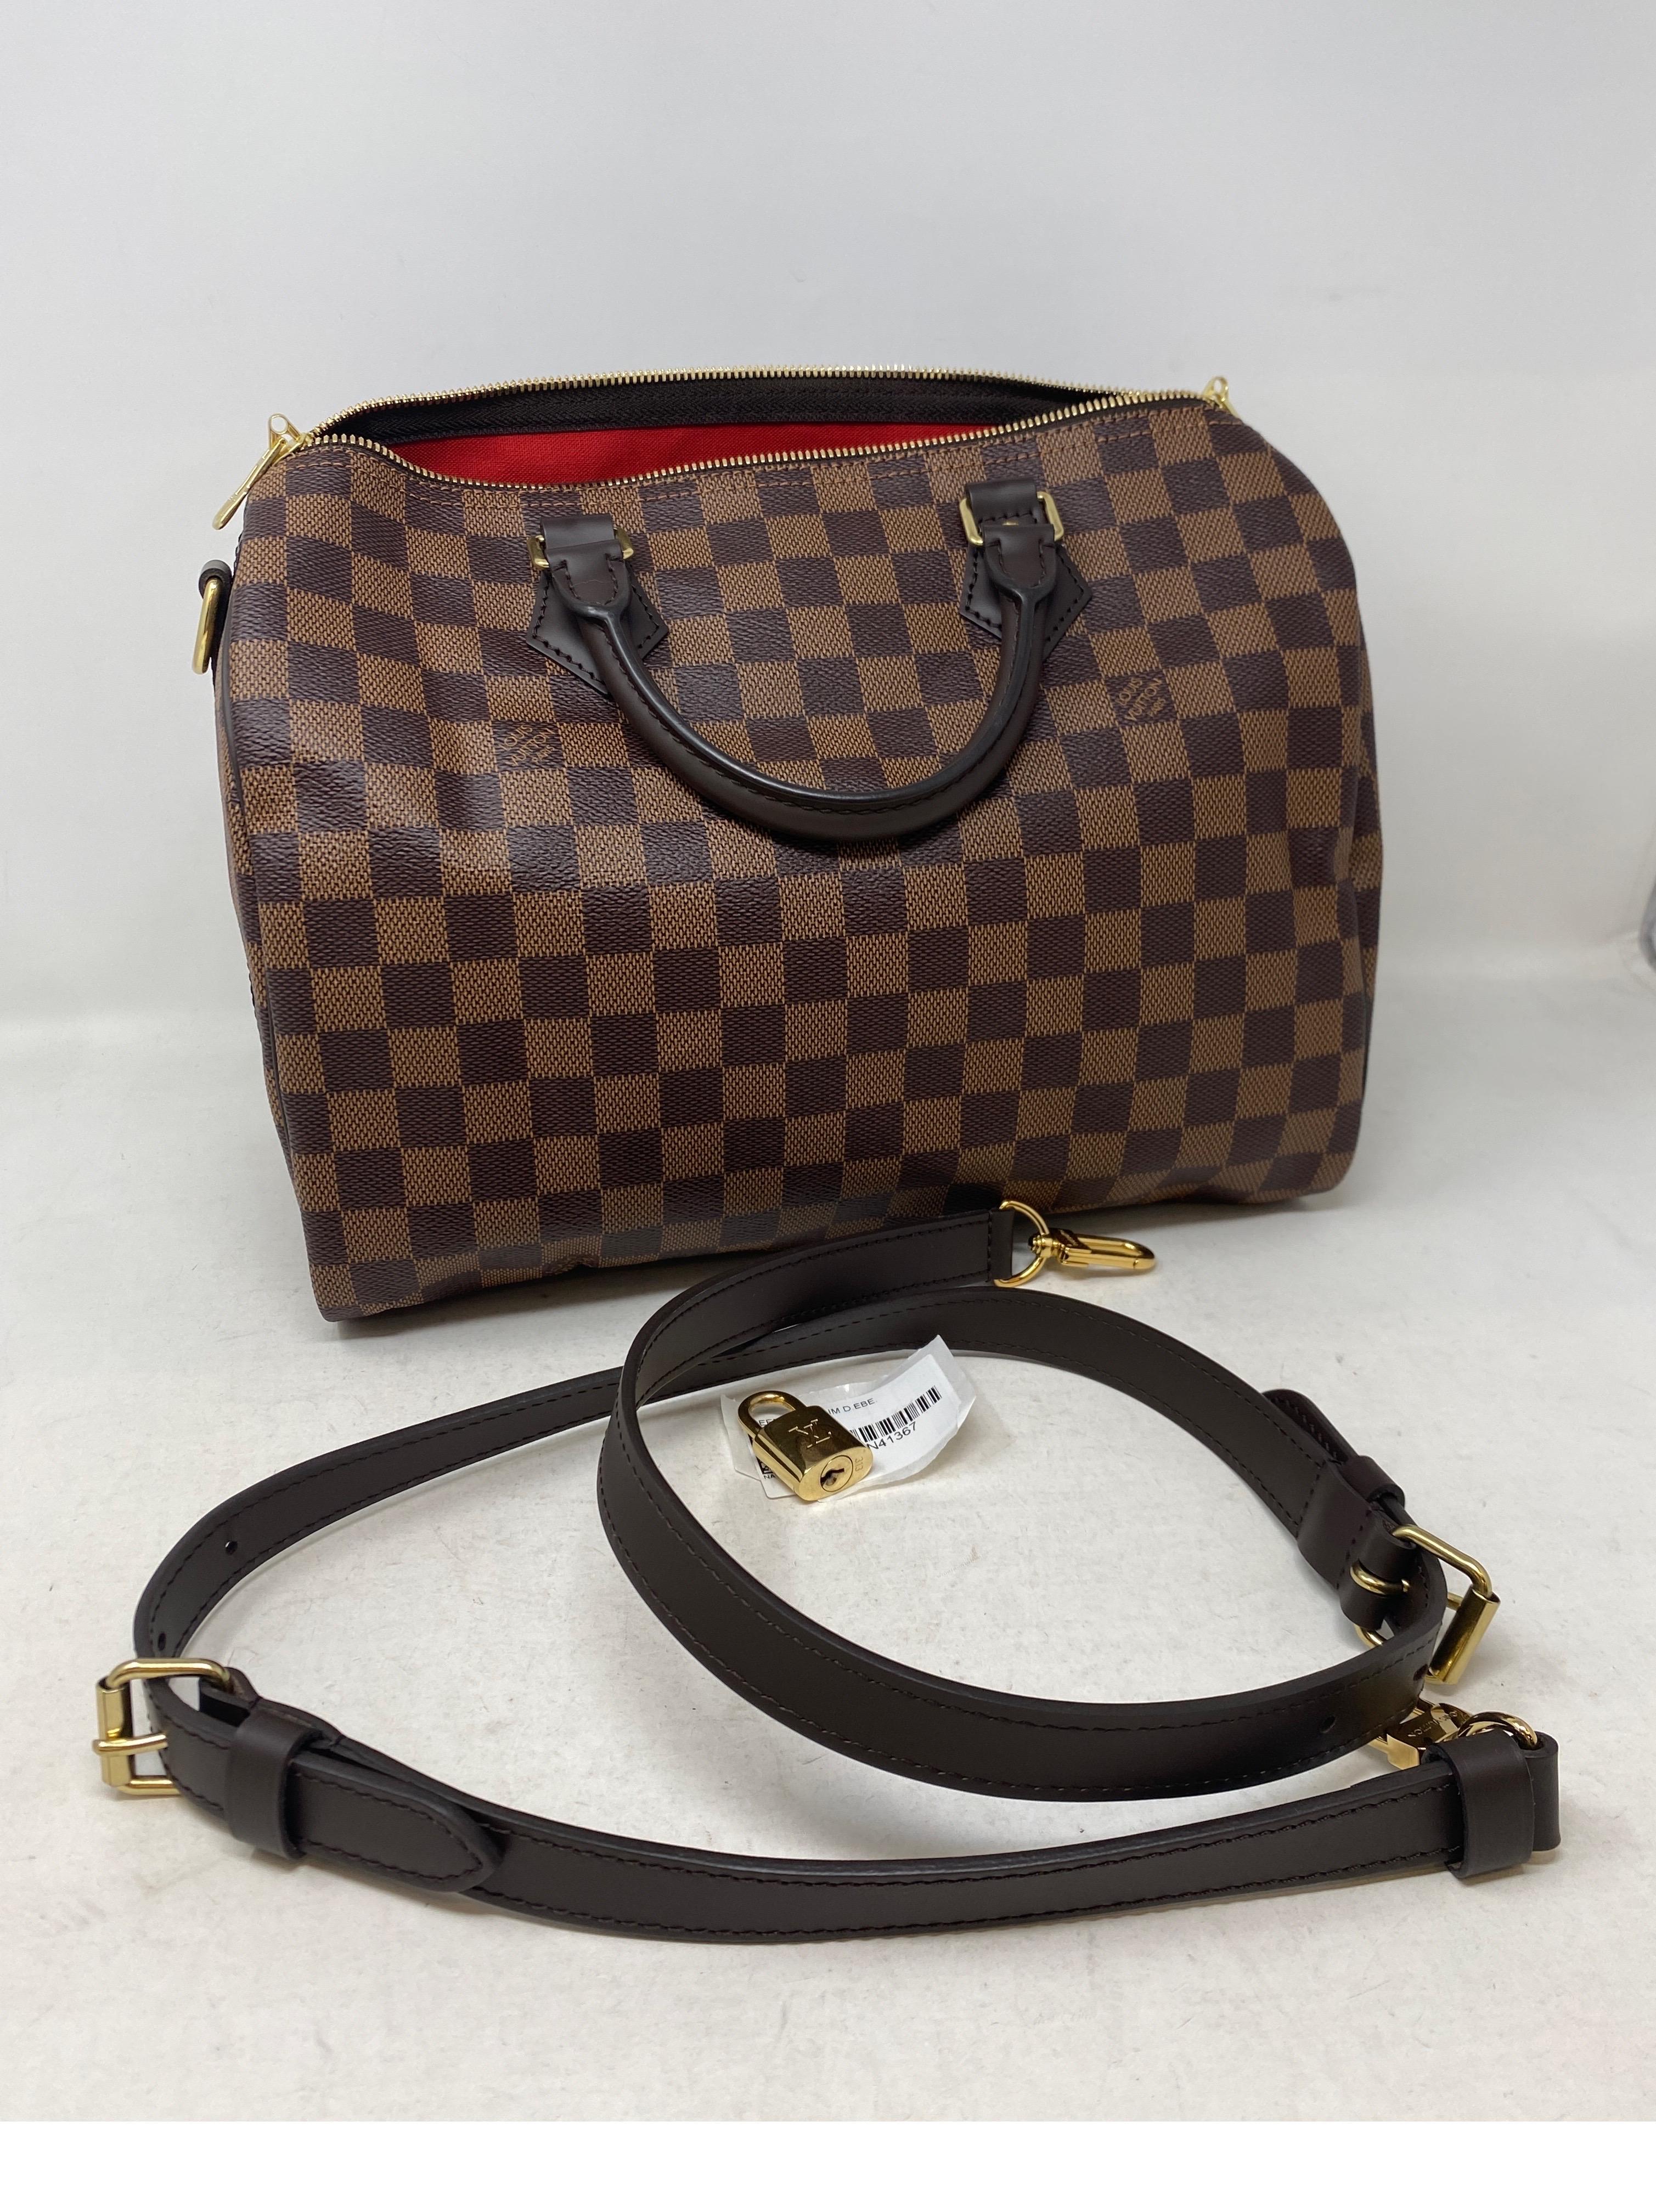 LOUIS VUITTON DAMIER EBENE, CLEANING, CONDITIONING, HOW TO, SPEEDY  BANDOULIERE 30